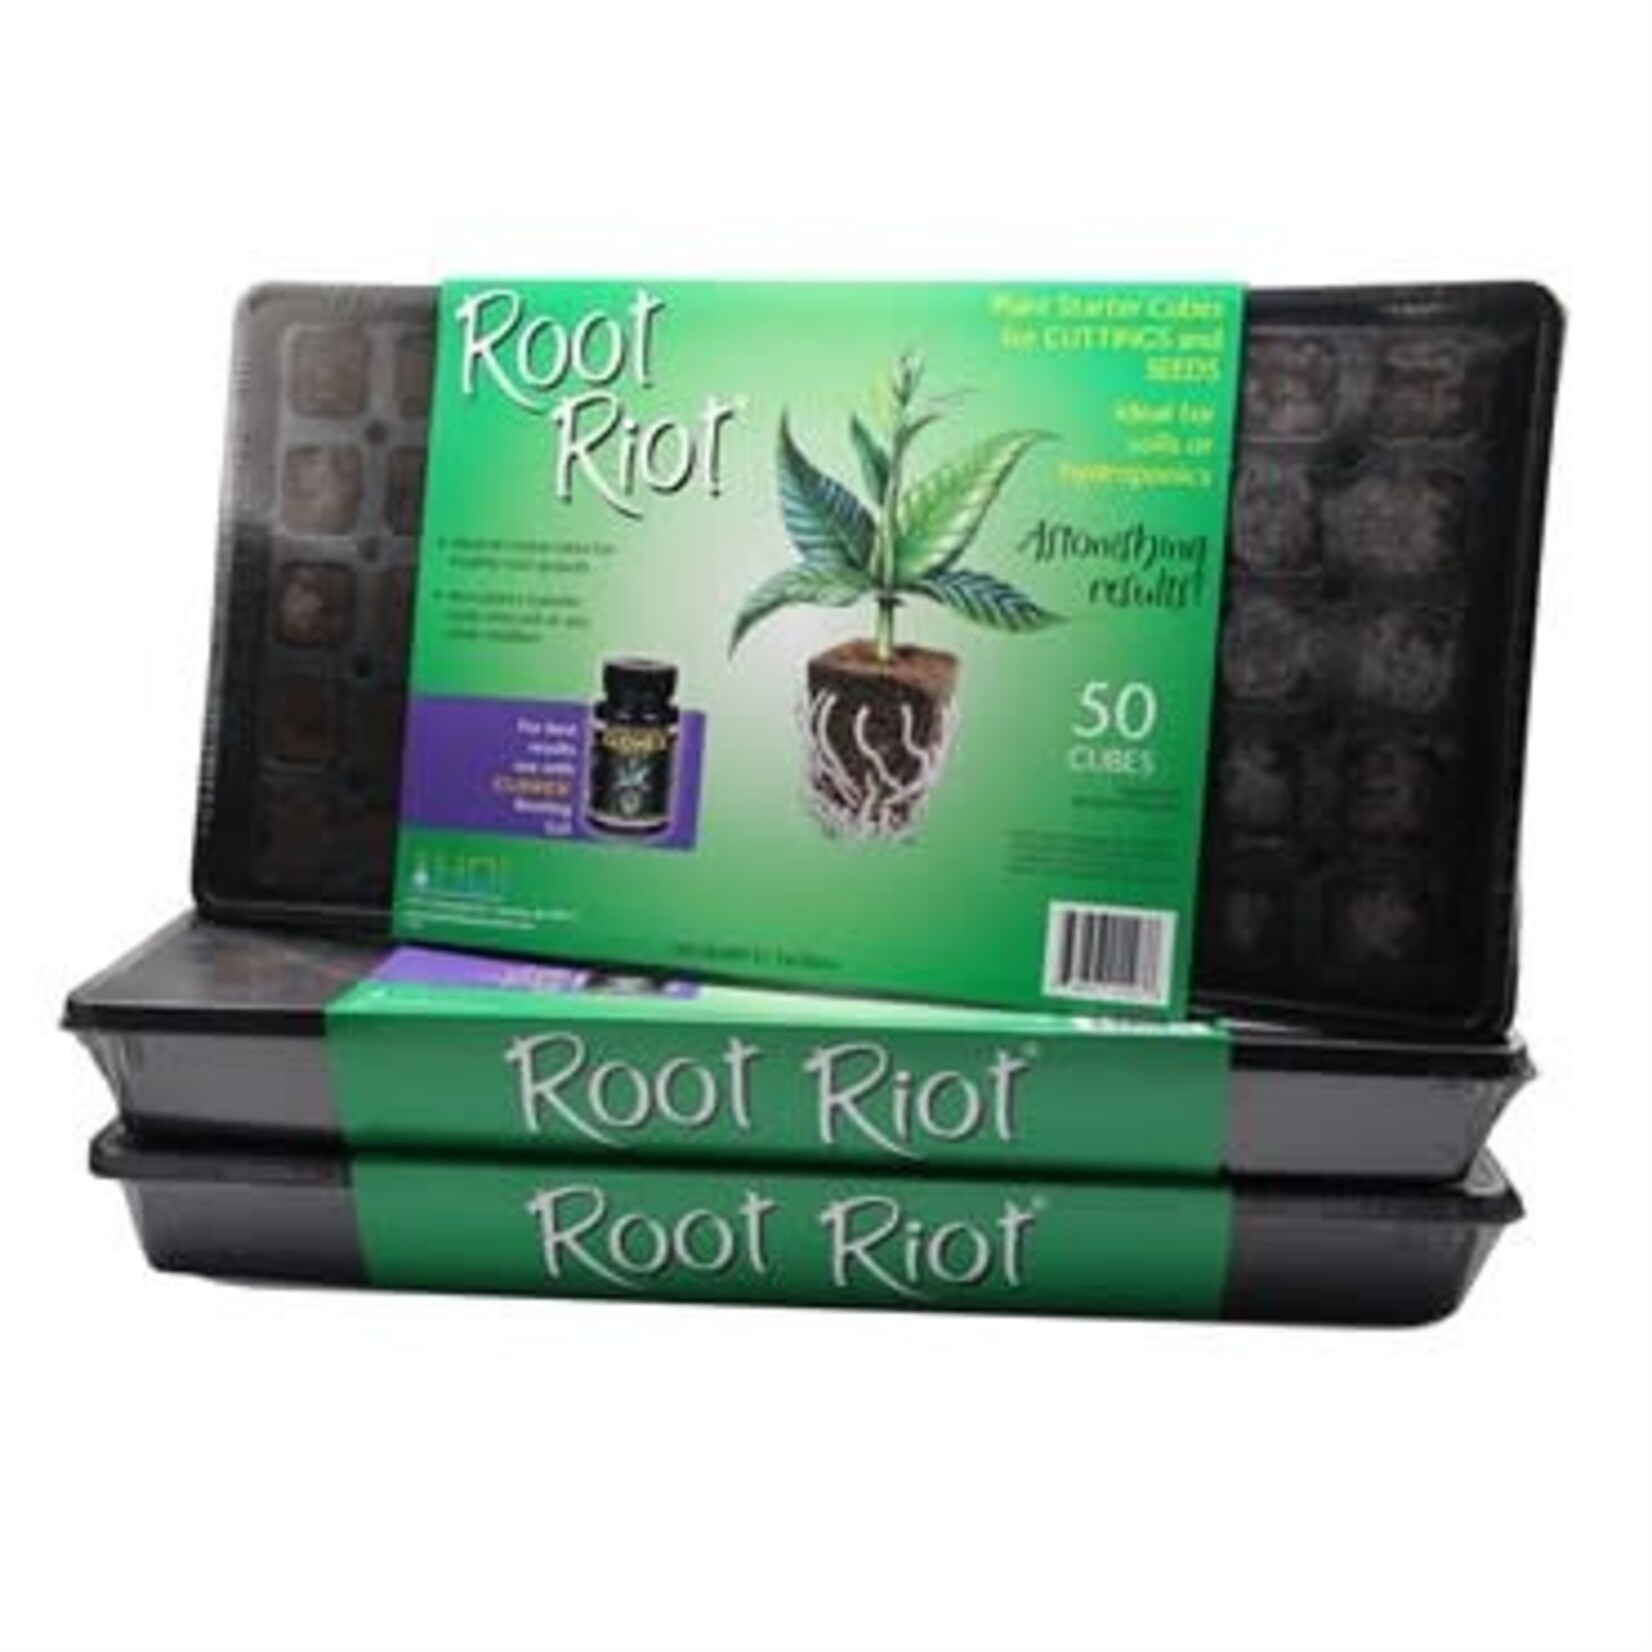 HDI Root Riot Tray Of 50 50CT